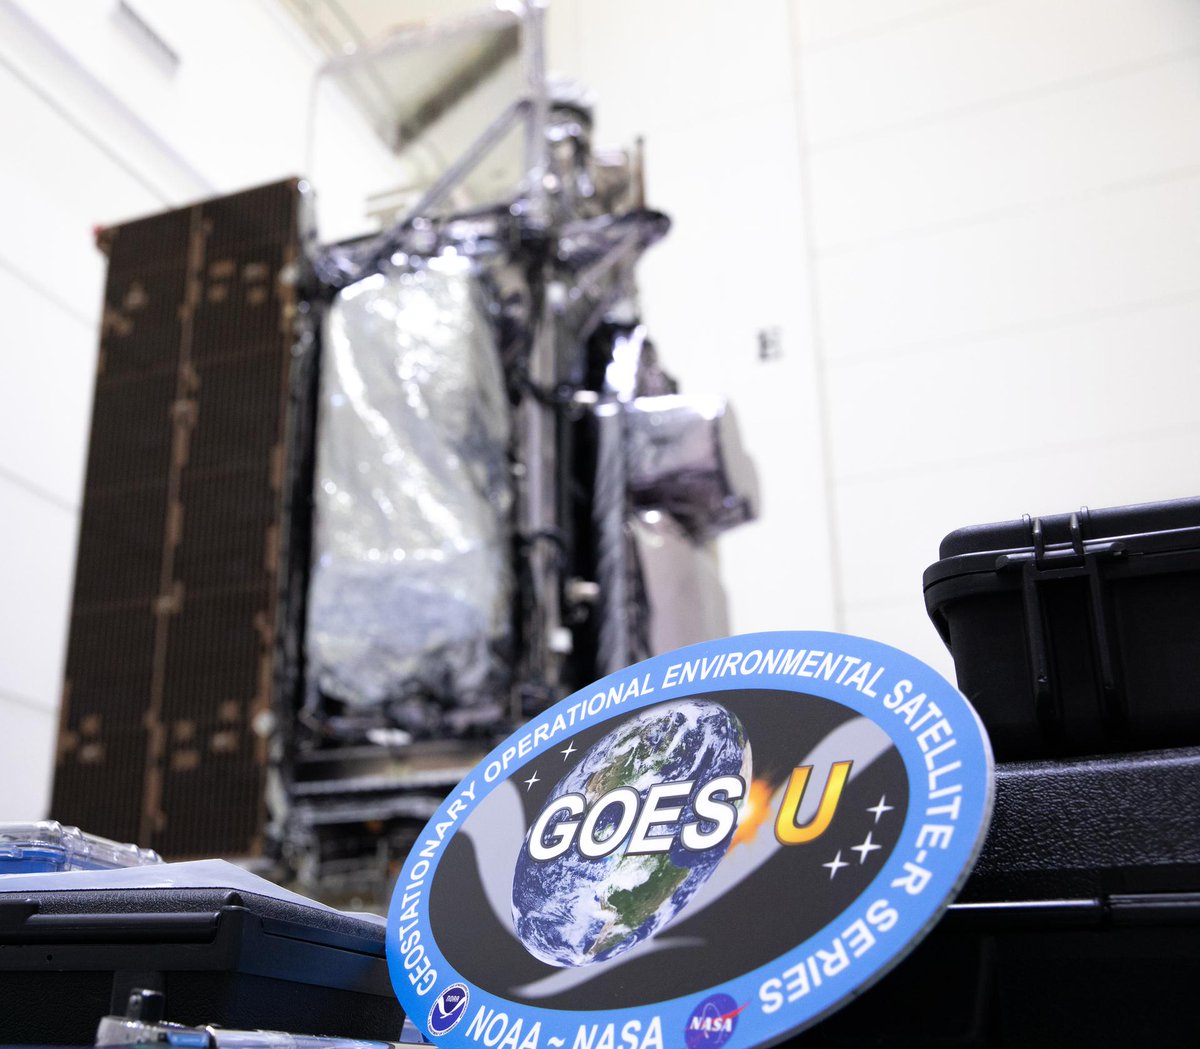 Are you #ReadyToGOES to our next #NASASocial? 🚀 Applications are open for creators to attend the launch of @NOAA's GOES-U weather-tracking satellite, scheduled to lift off from @NASAKennedy on June 25. Apply by May 14 at 3pm ET (1900 UTC)! go.nasa.gov/4agb5Em